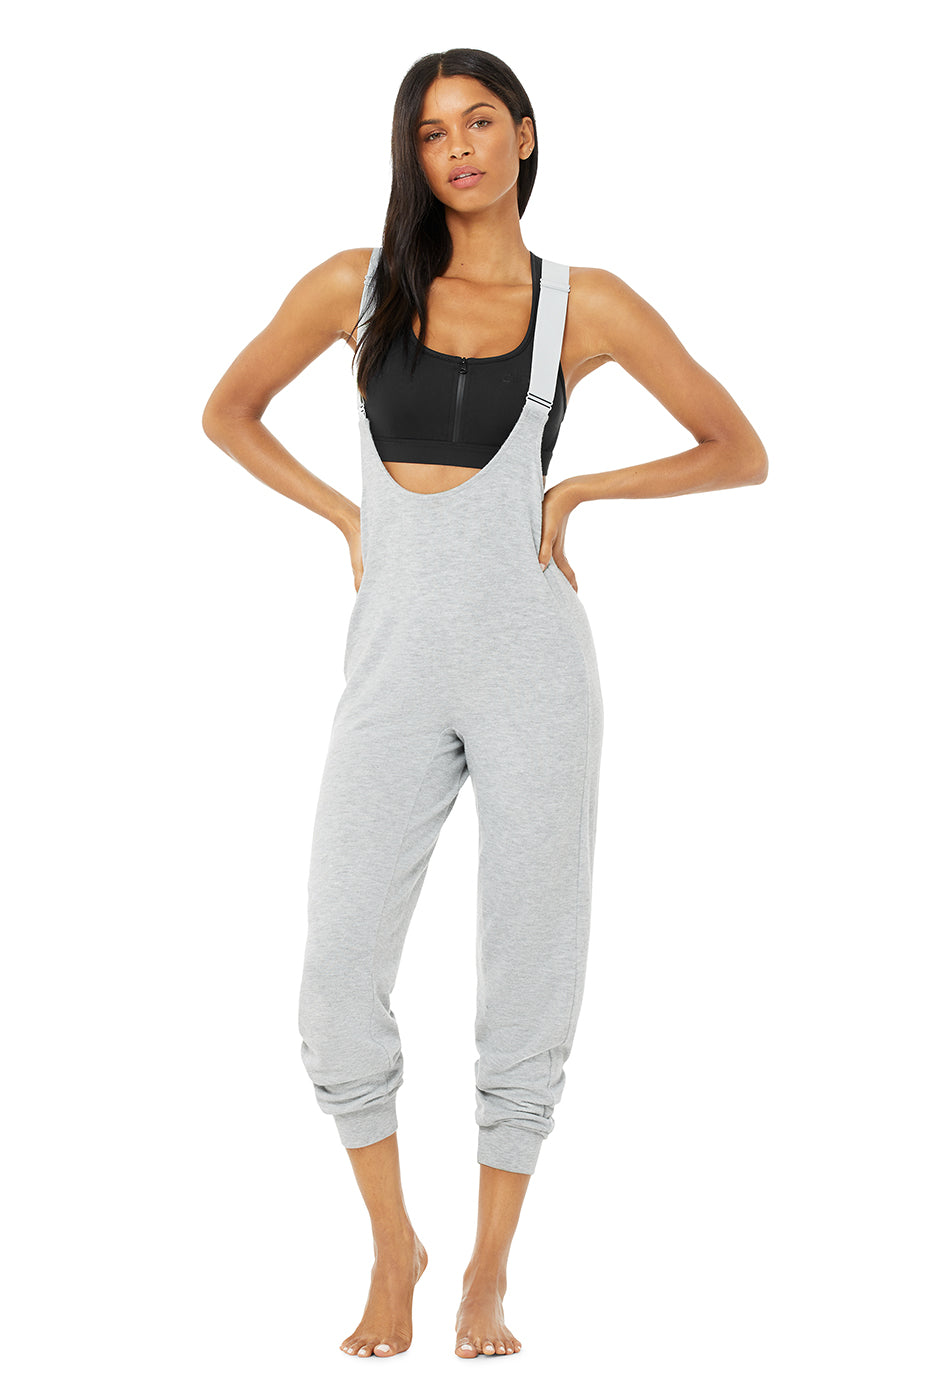 Layback Jumpsuit Top in Athletic Heather Grey by Alo Yoga